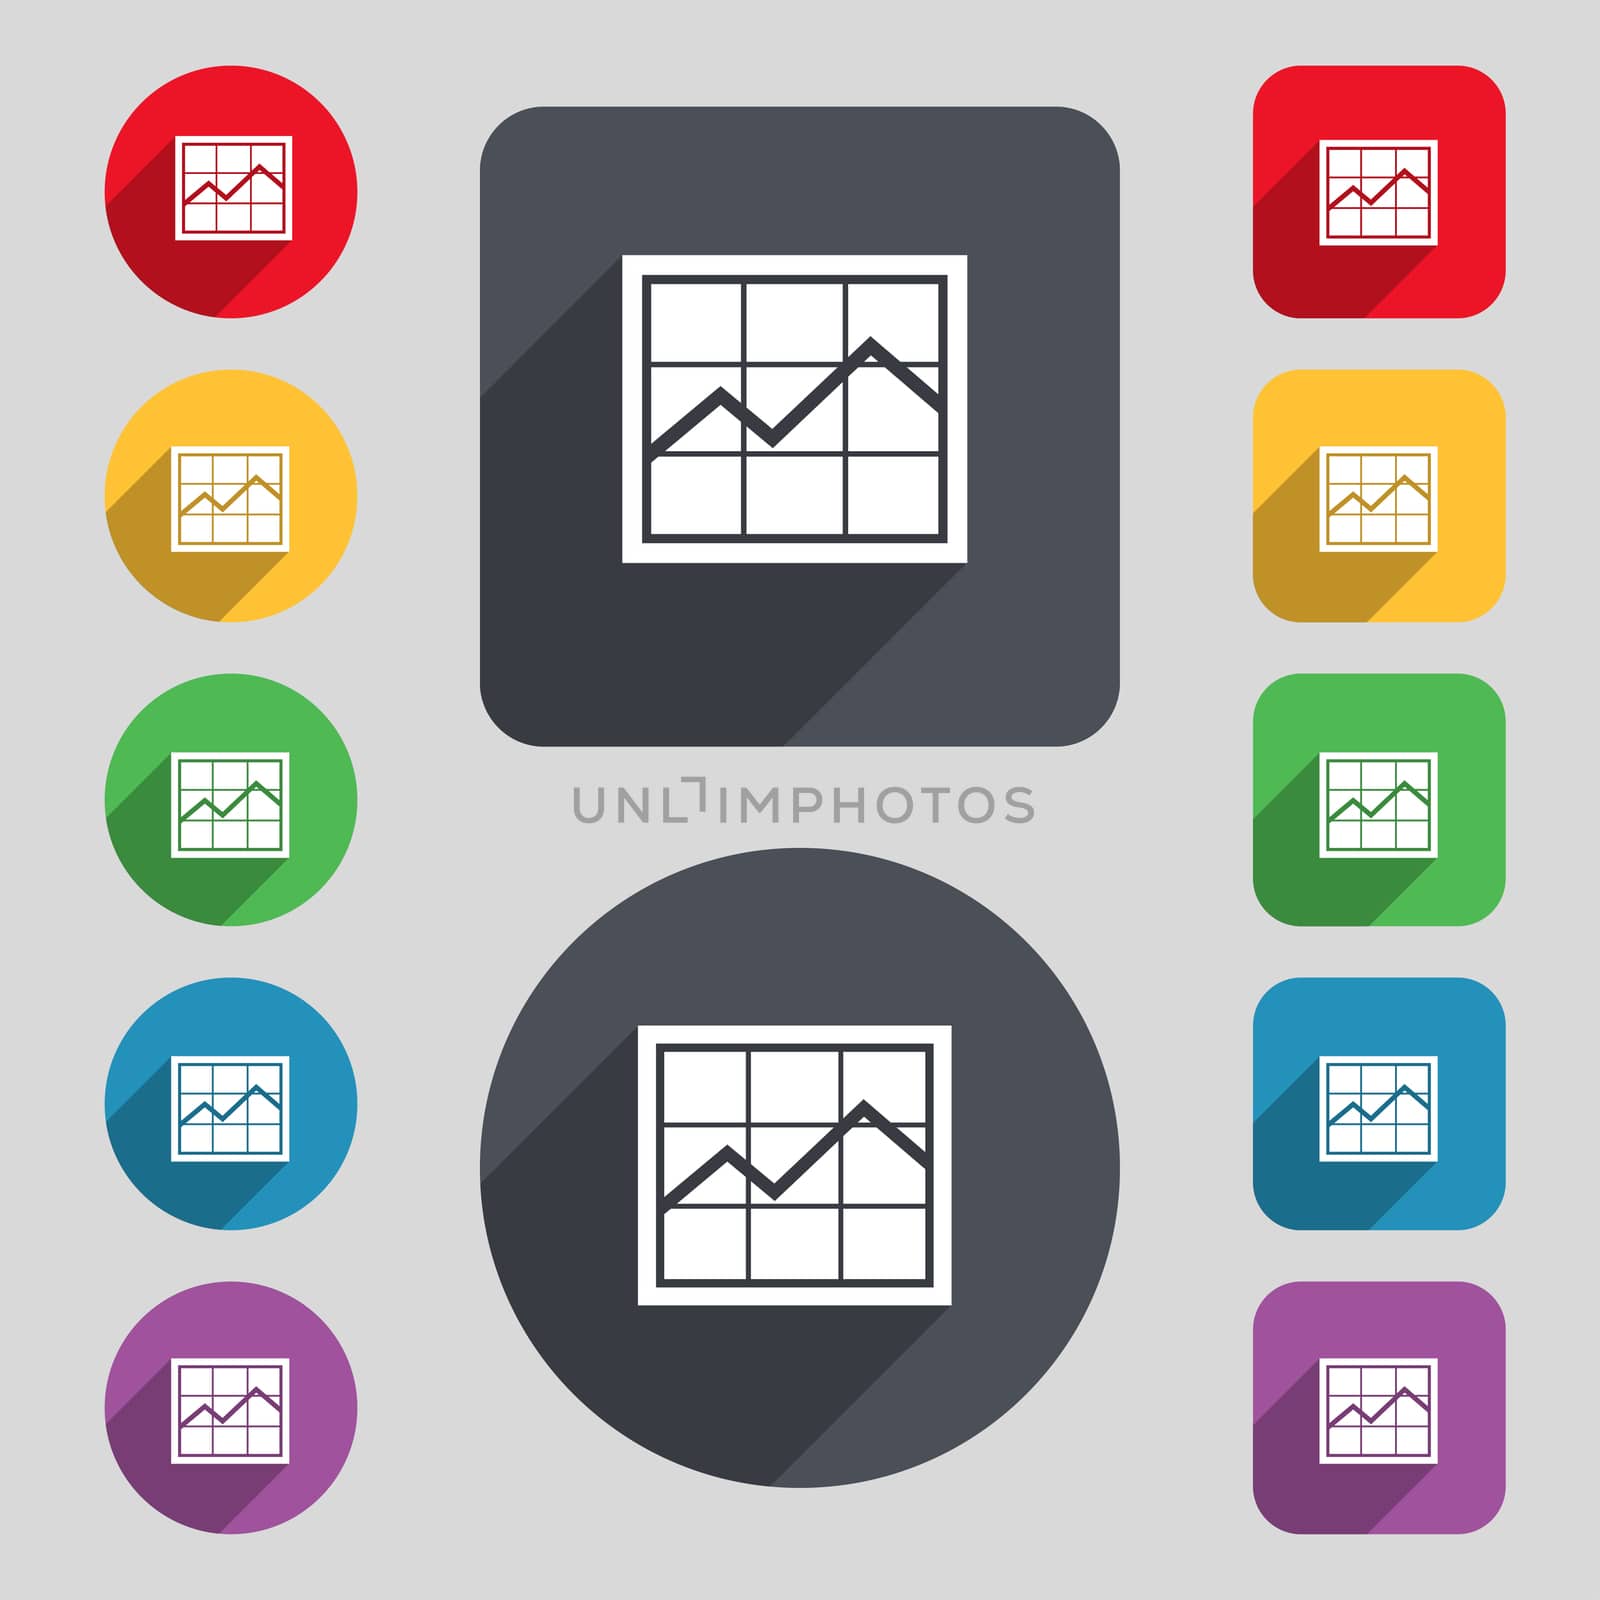 Chart icon sign. A set of 12 colored buttons and a long shadow. Flat design. illustration